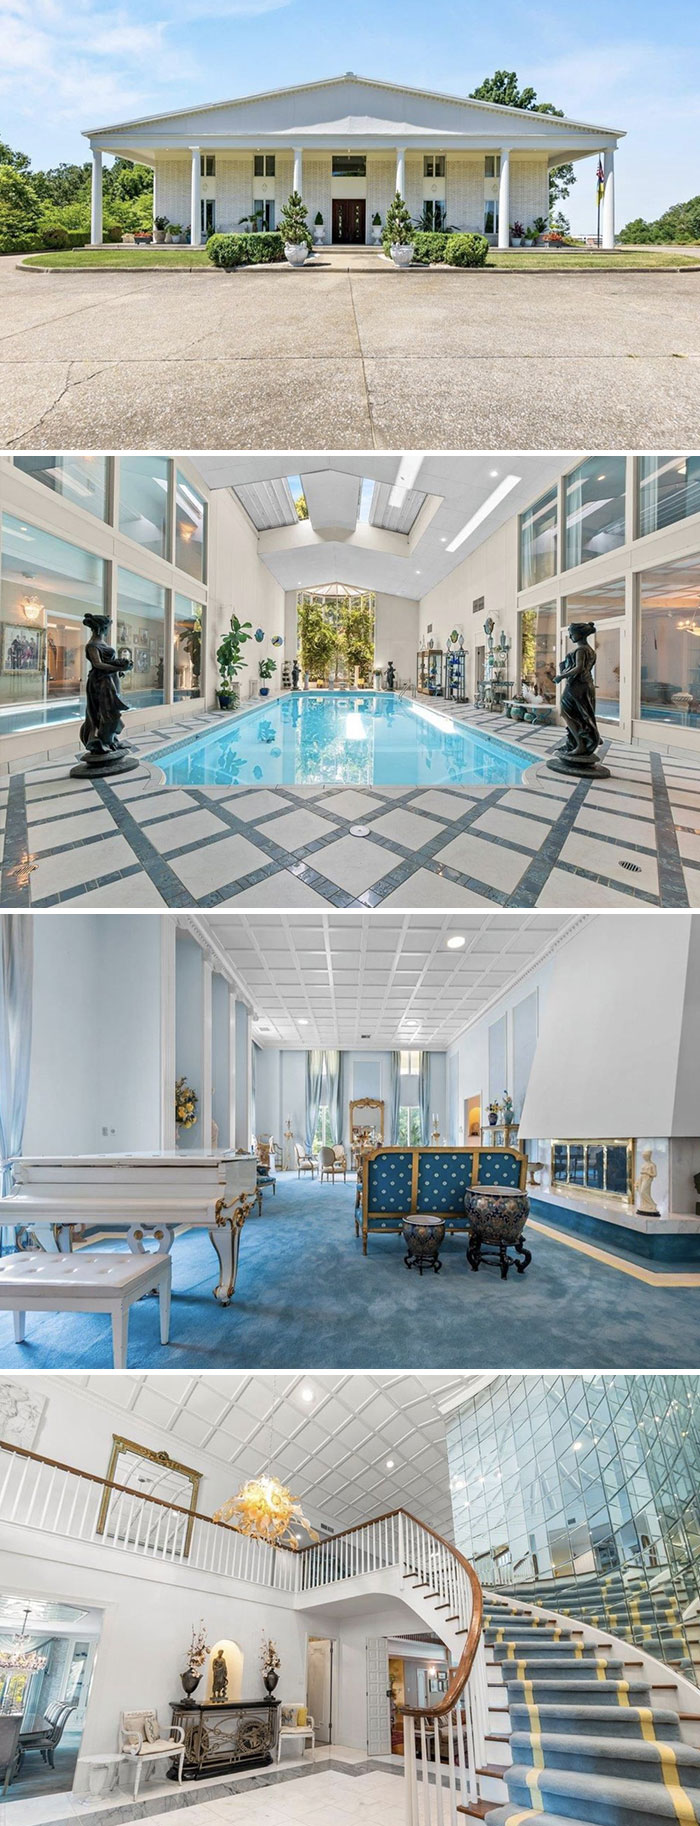 Polar Vortex Hitting Hard? Retire To This Cocaine-Fueled Palace, Featuring An Indoor Pool And Too Many Statues